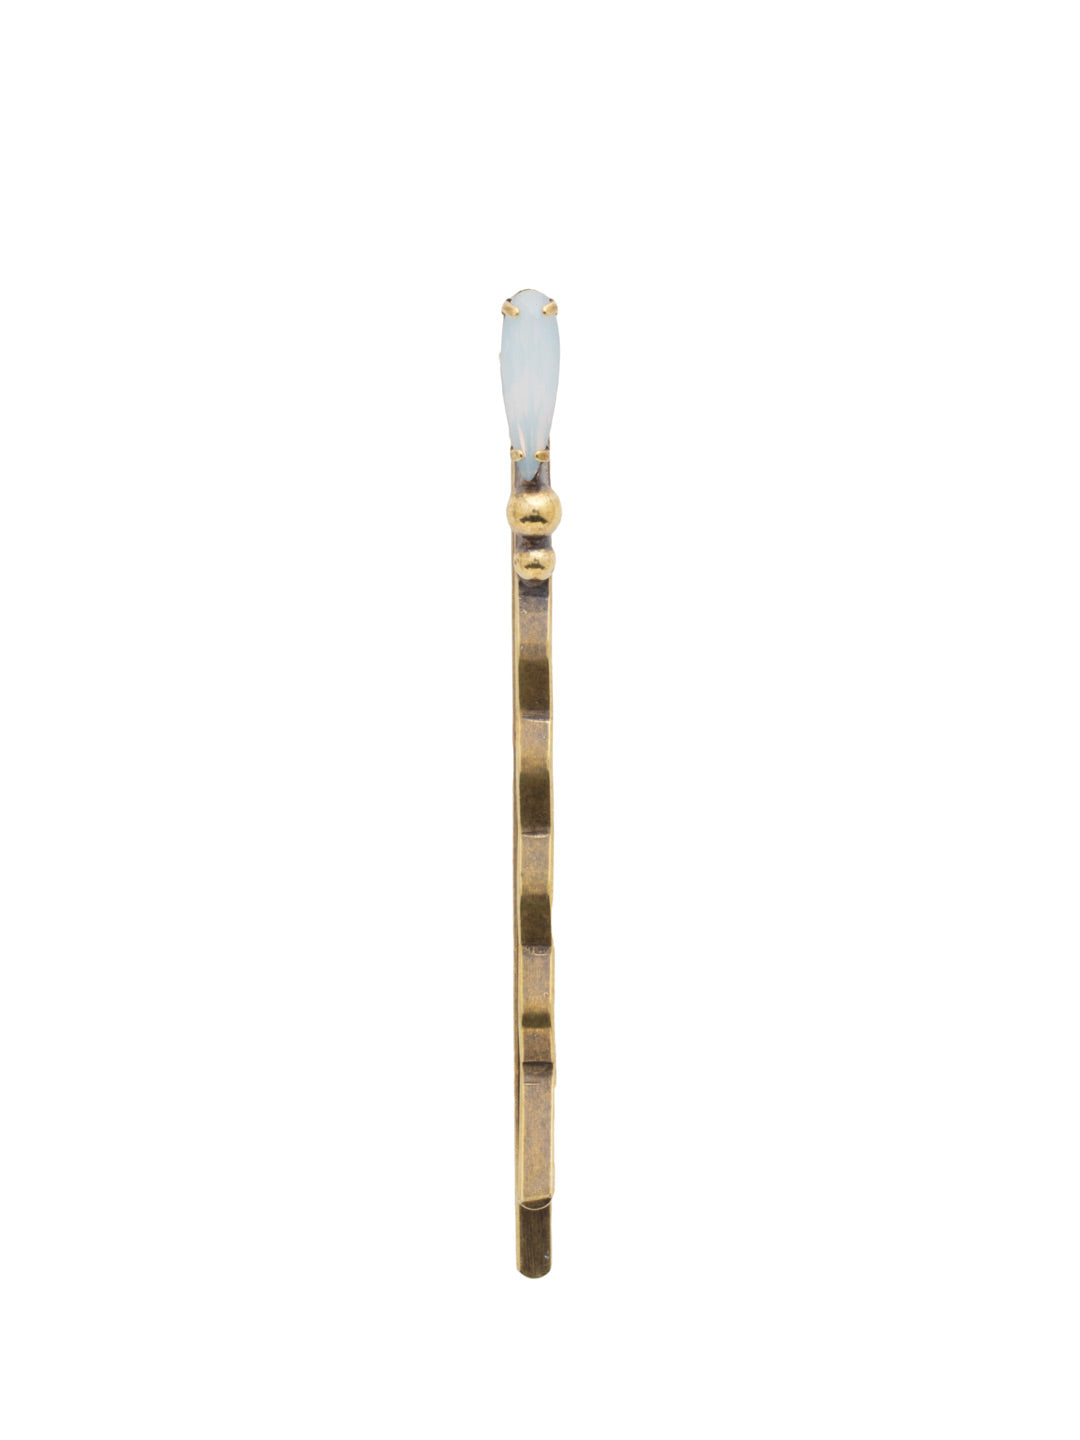 Sabella Hair Pin Other Accessory - HCZ66AGWO - <p>An elegant and simple hair pin, embellished with a single crystal shard. The Sabella is on point for a pinned back hair style. From Sorrelli's White Opal collection in our Antique Gold-tone finish.</p>